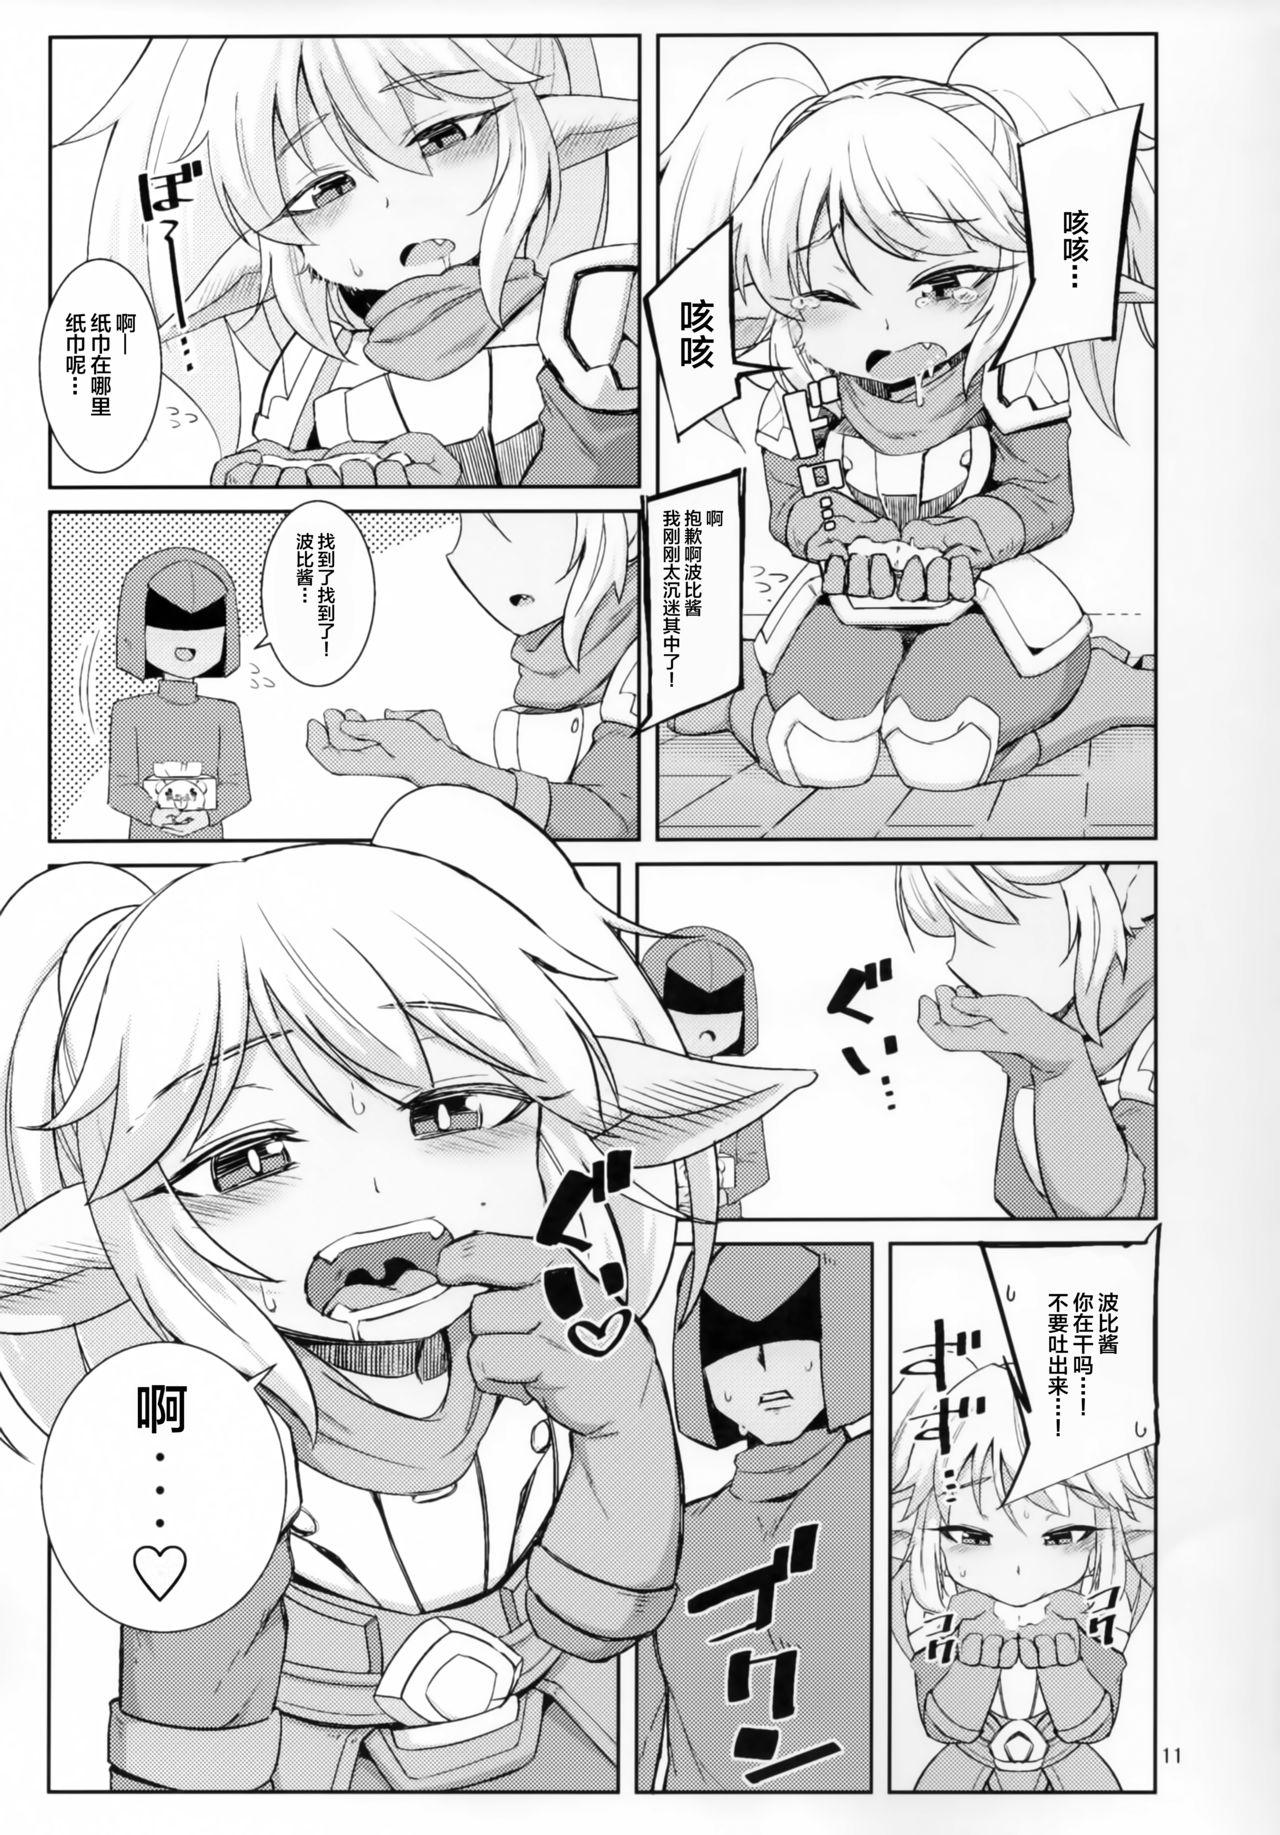 From Dosukebe Yodle focus on Poppy! - League of legends Hairypussy - Page 11